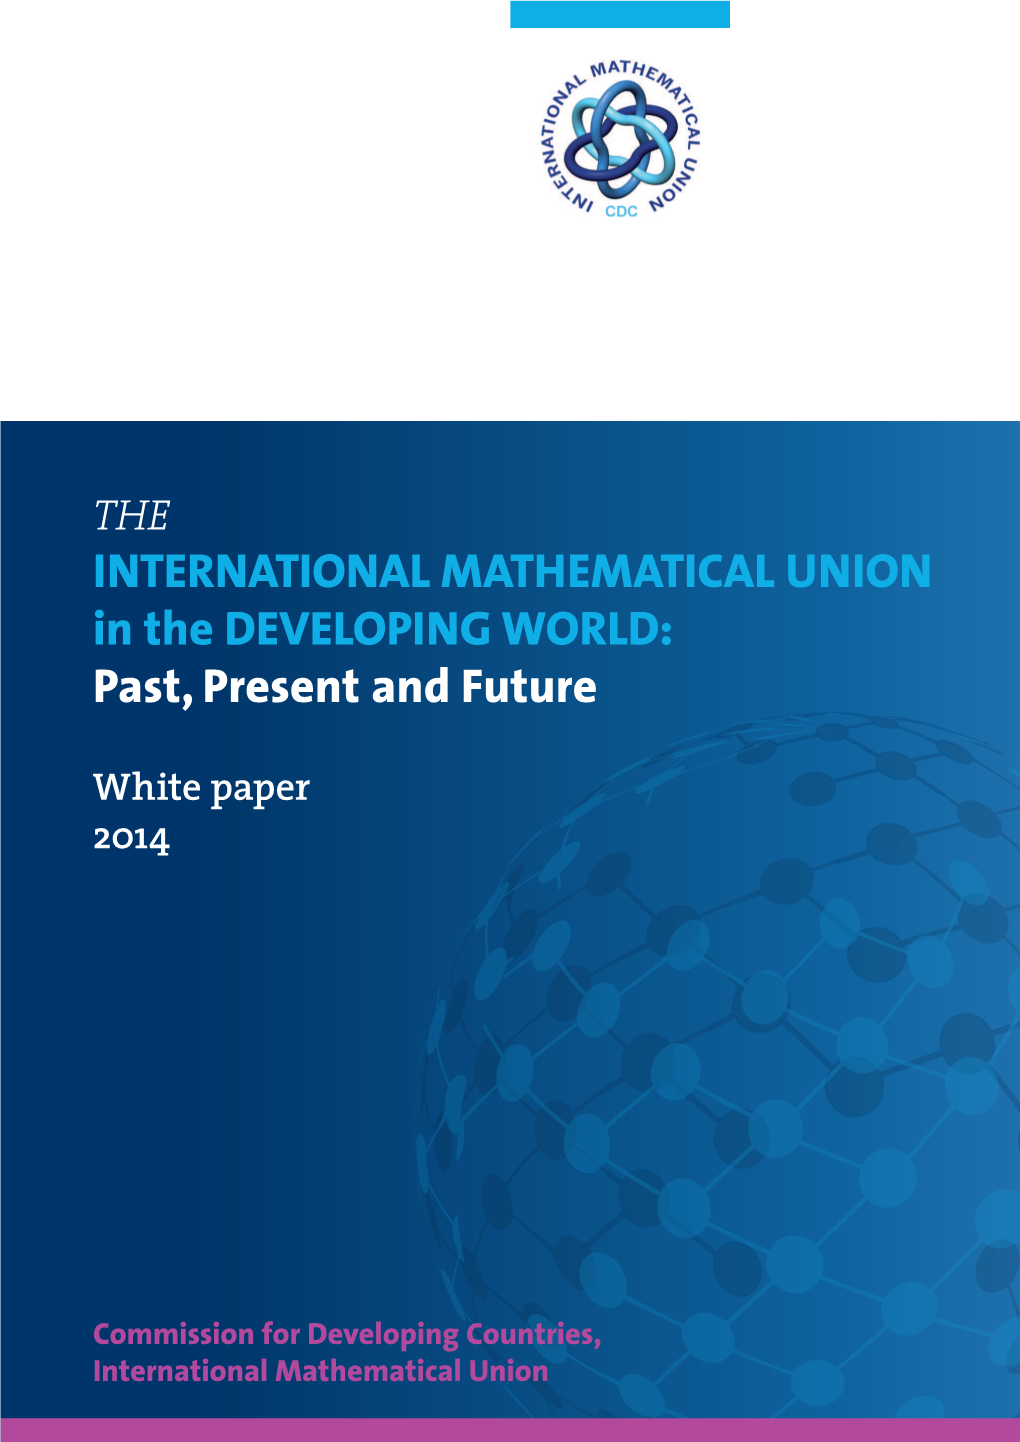 INTERNATIONAL MATHEMATICAL UNION in the DEVELOPING WORLD: Past, Present and Future